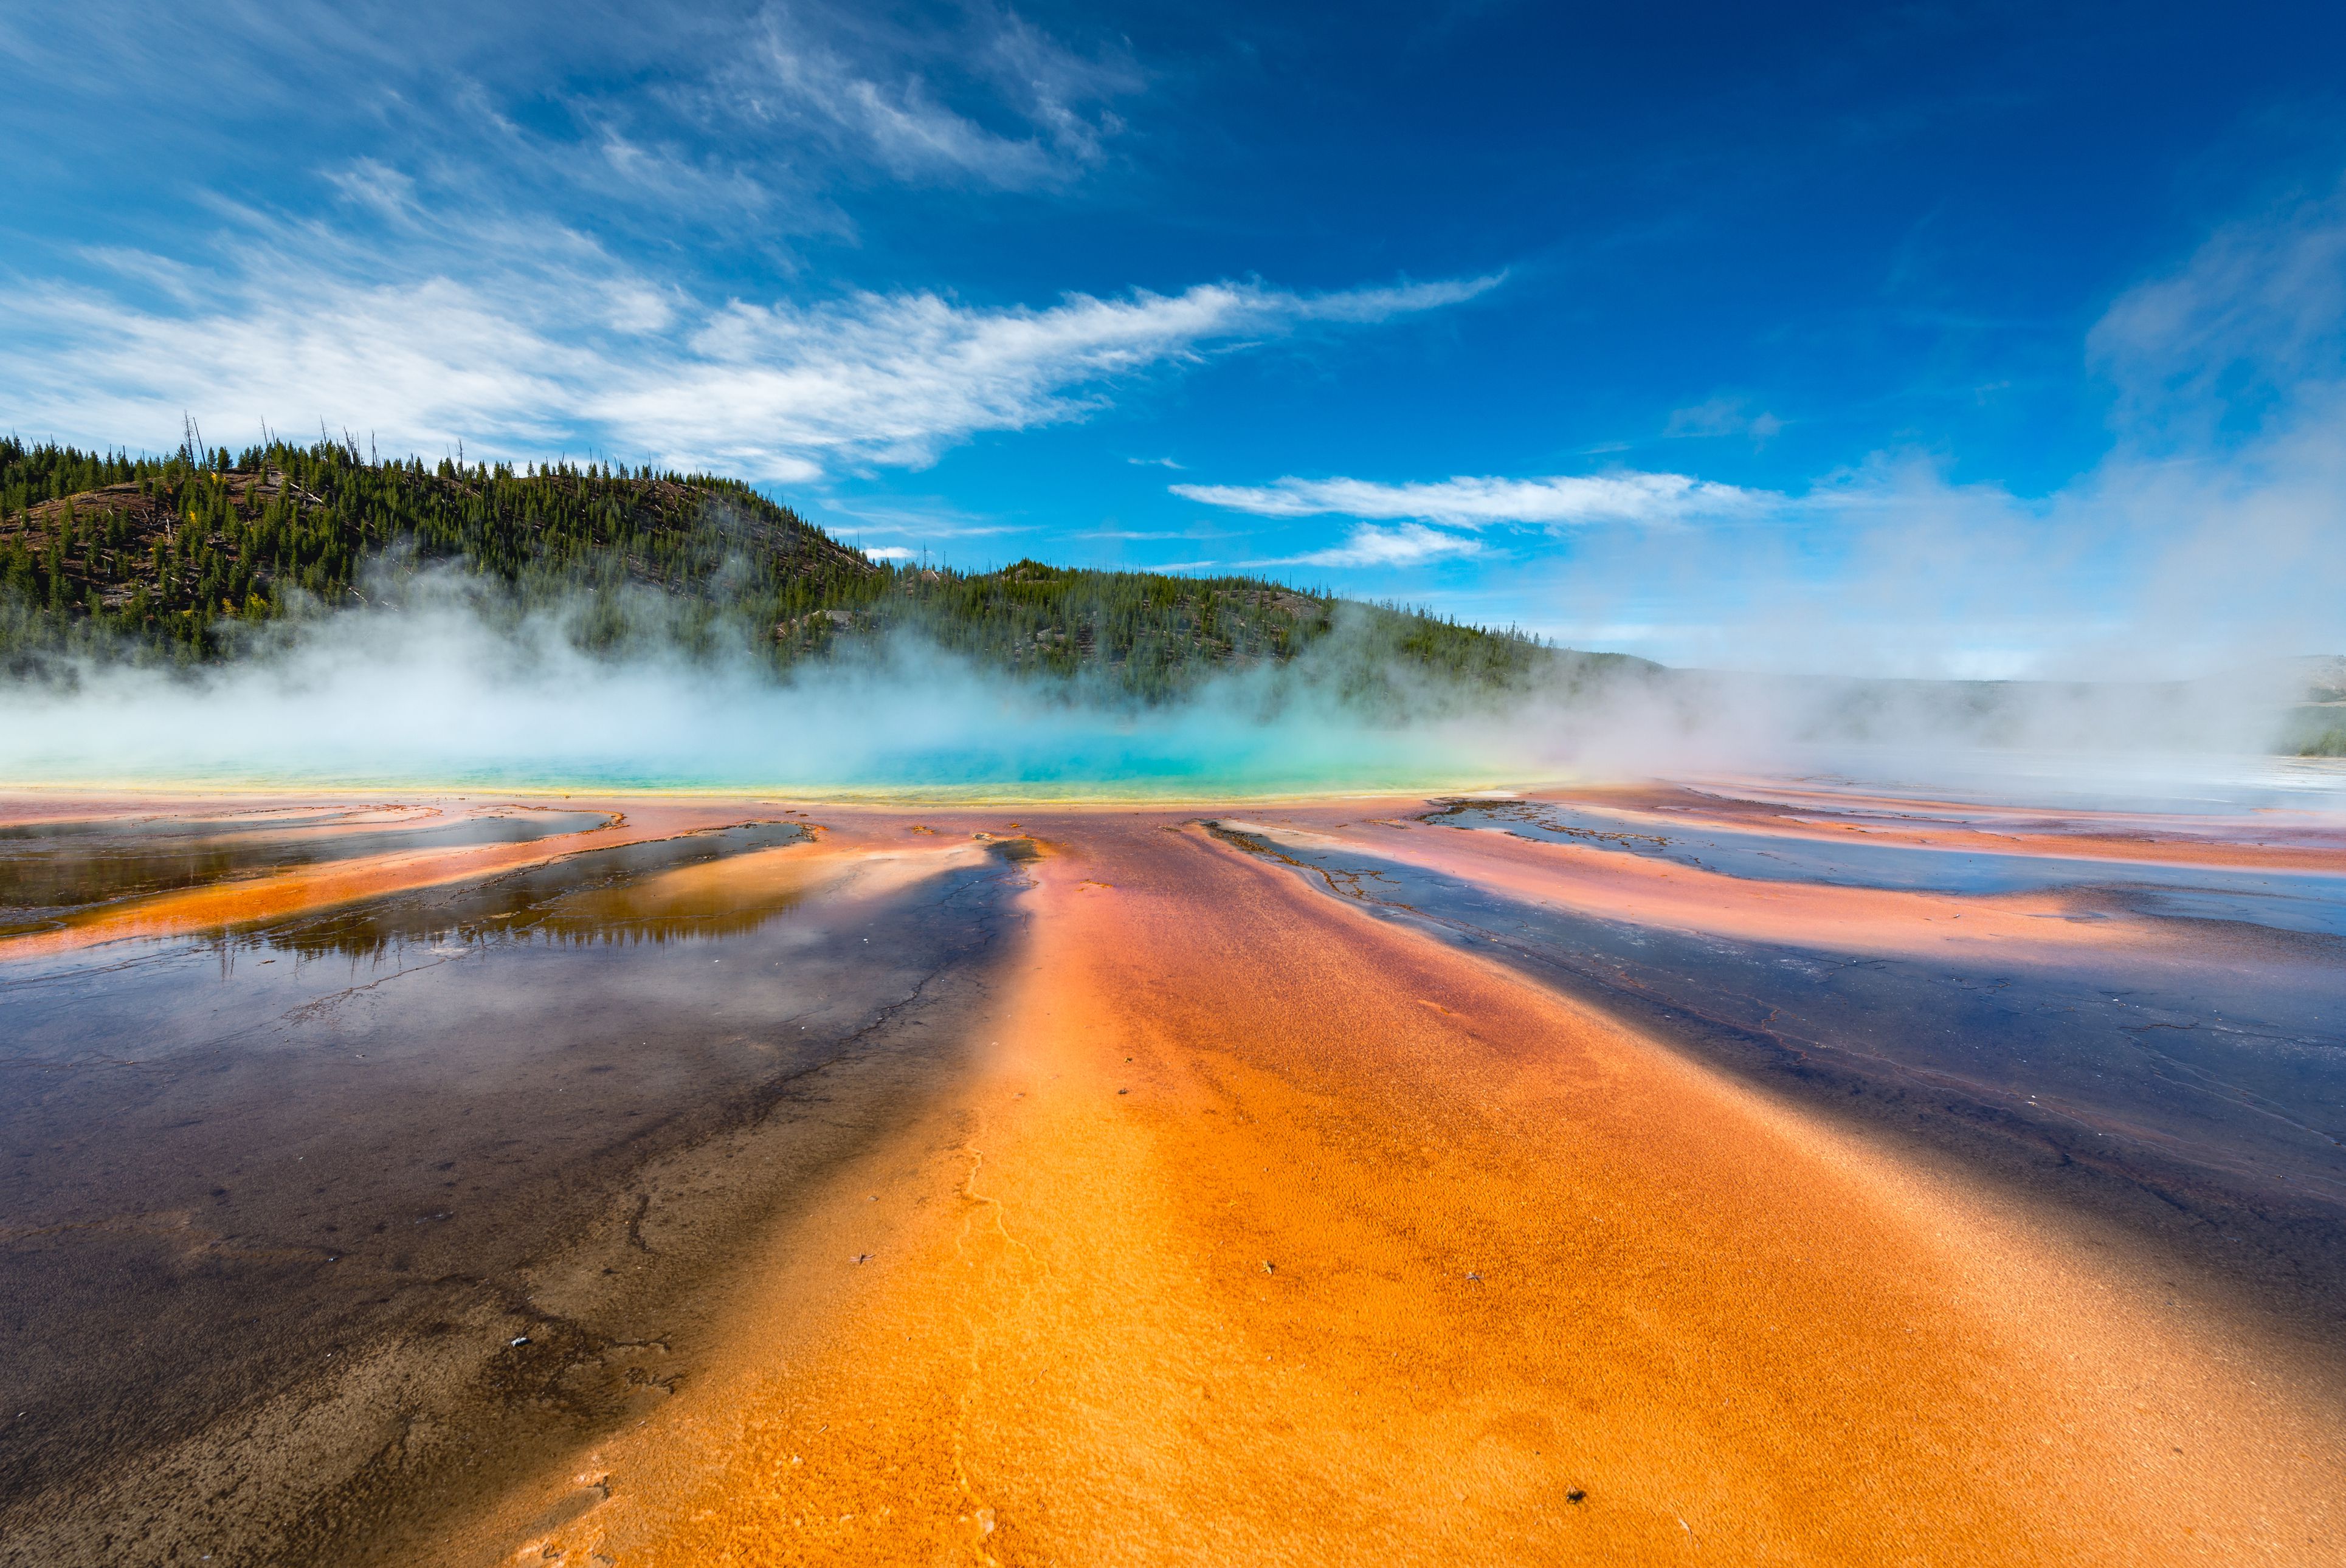 Information on Visiting Yellowstone National Park
